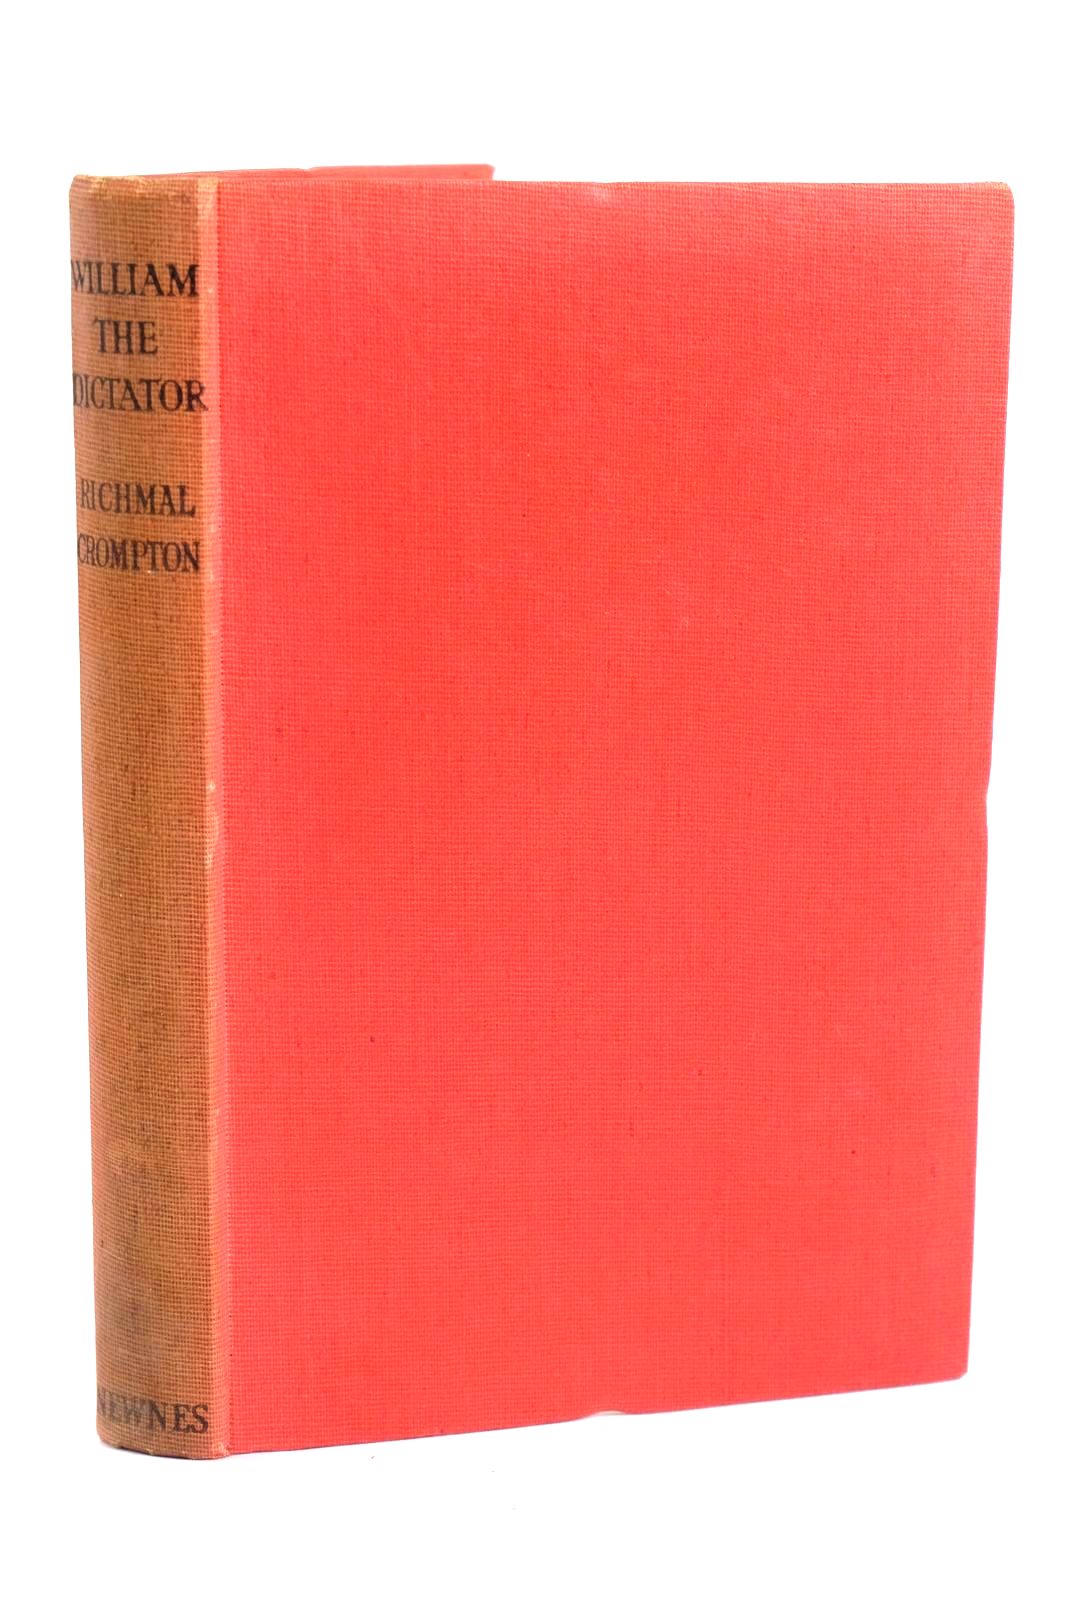 Photo of WILLIAM THE DICTATOR written by Crompton, Richmal illustrated by Henry, Thomas published by George Newnes Limited (STOCK CODE: 1319684)  for sale by Stella & Rose's Books